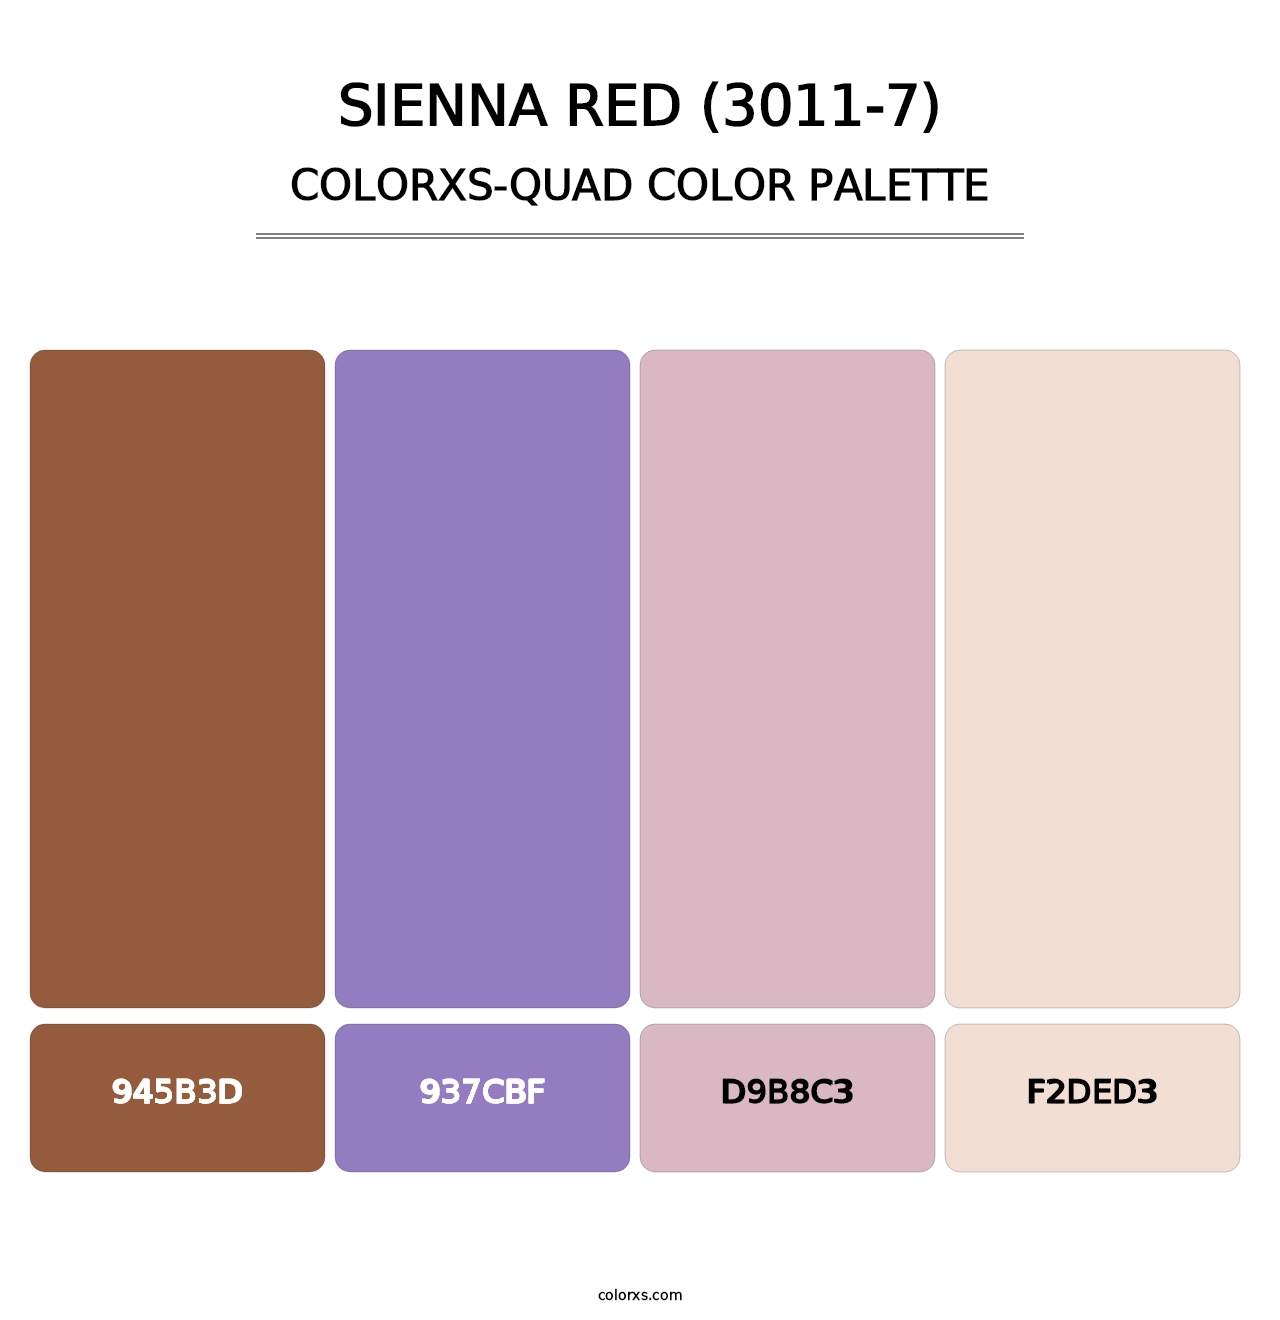 Sienna Red (3011-7) - Colorxs Quad Palette